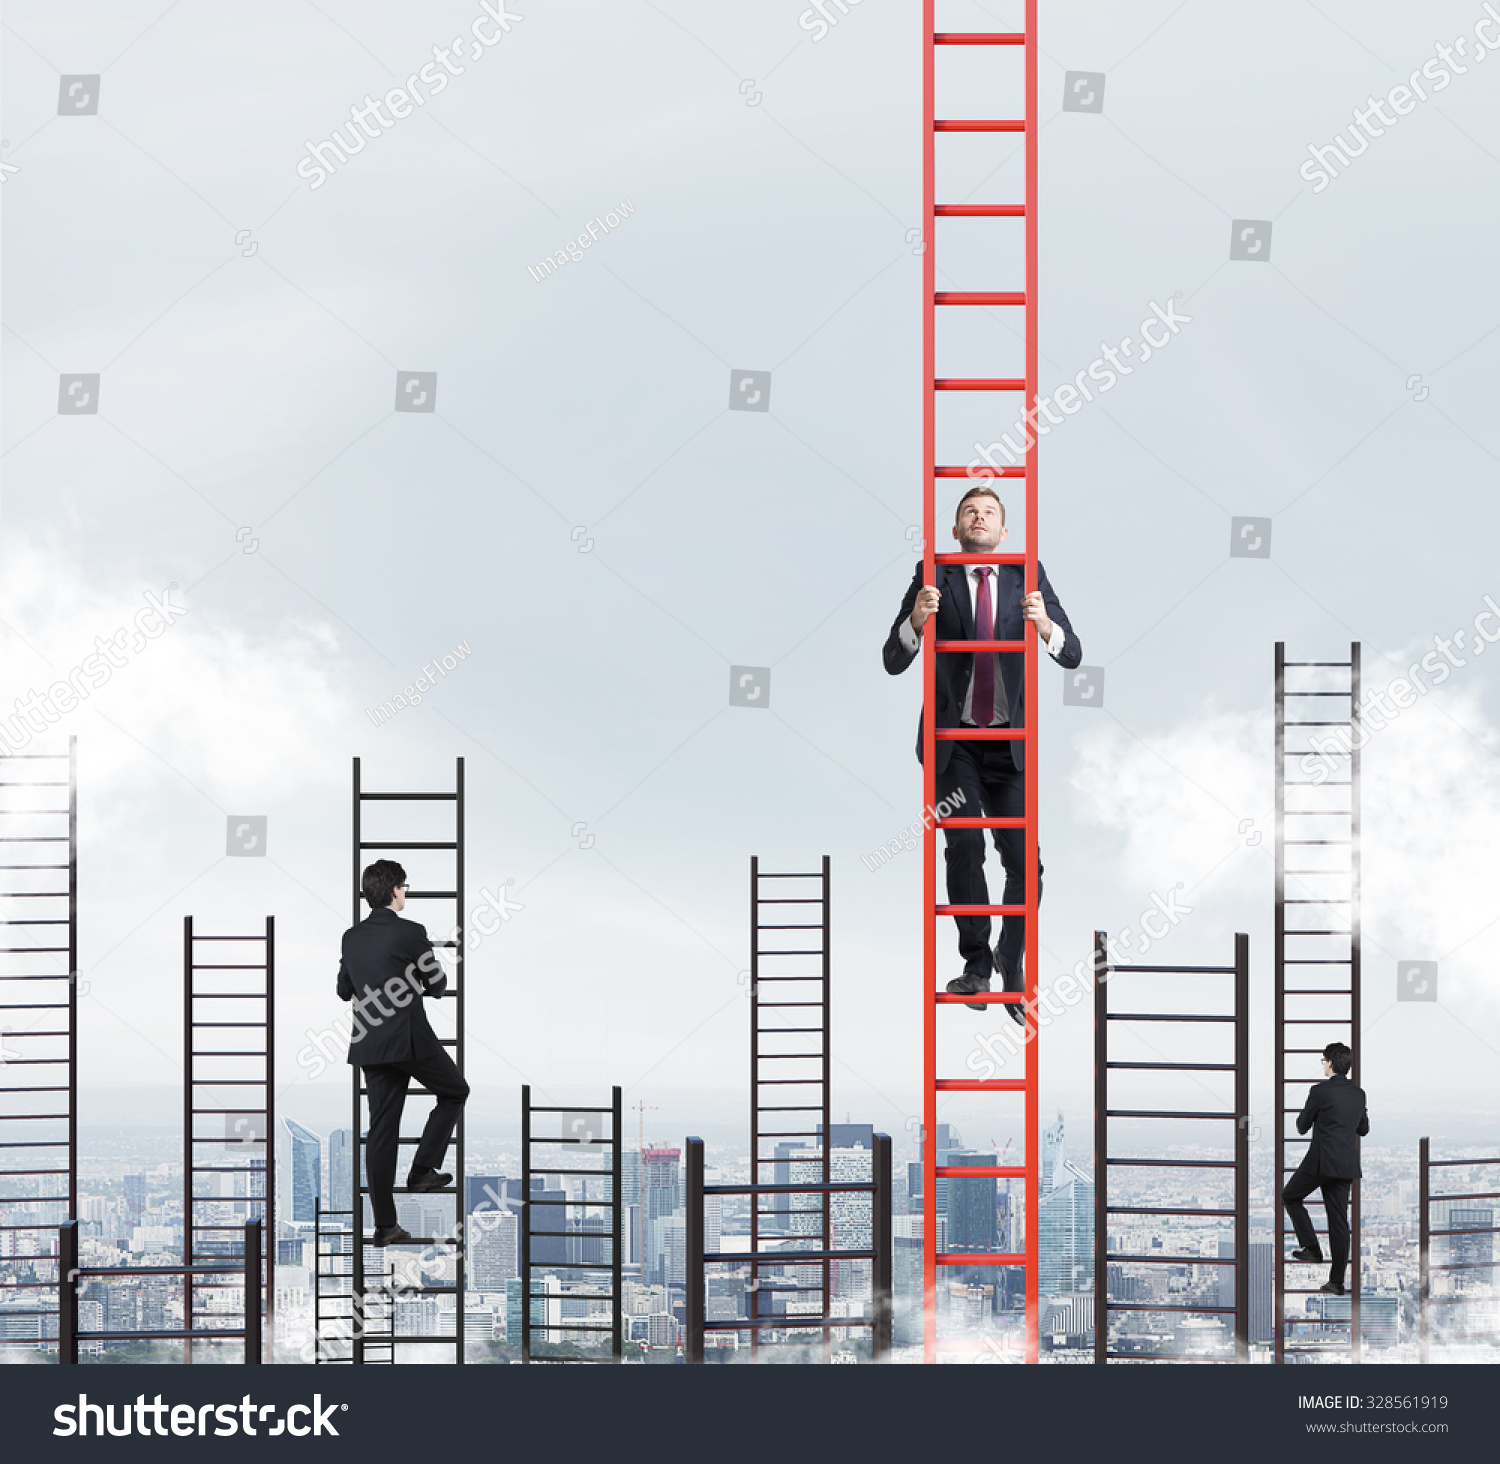 A concept of competition, and problem solving. Several businessmen are racing to achieve the highest point using ladders. New York city view. #328561919